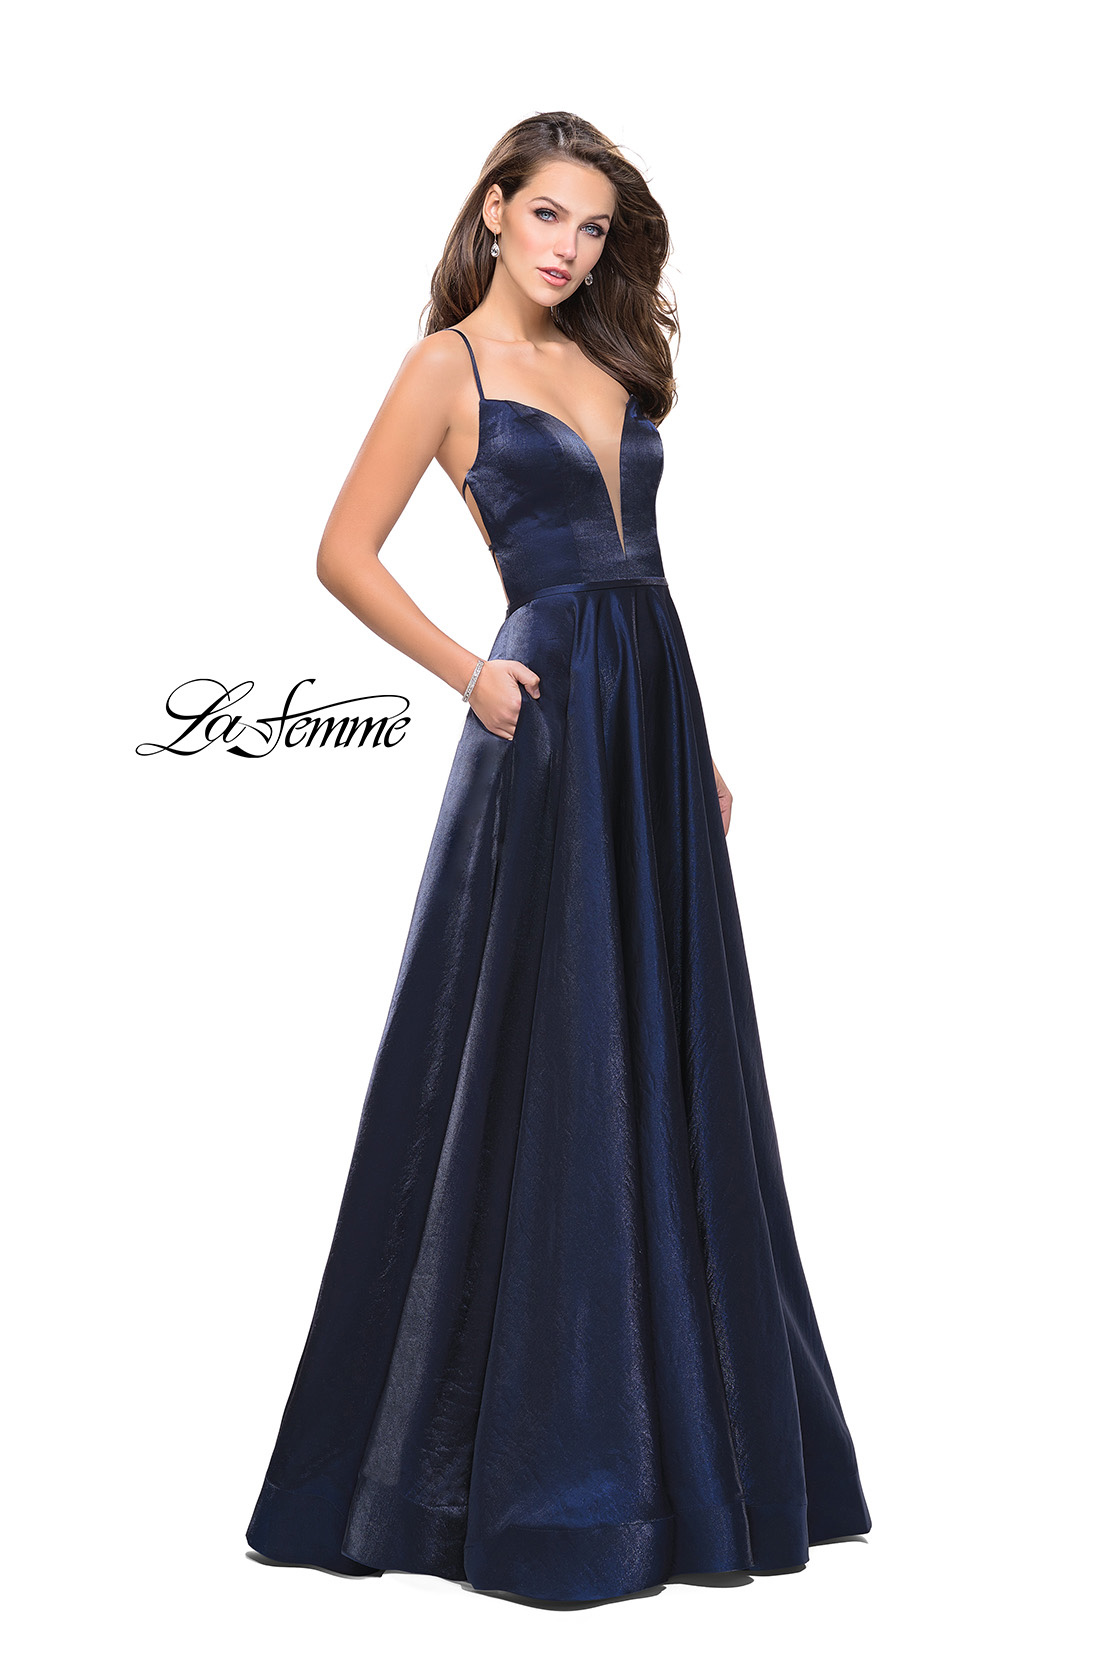 Navy Prom Dress with Shiny Satin Fabric and Deep V by La Femme